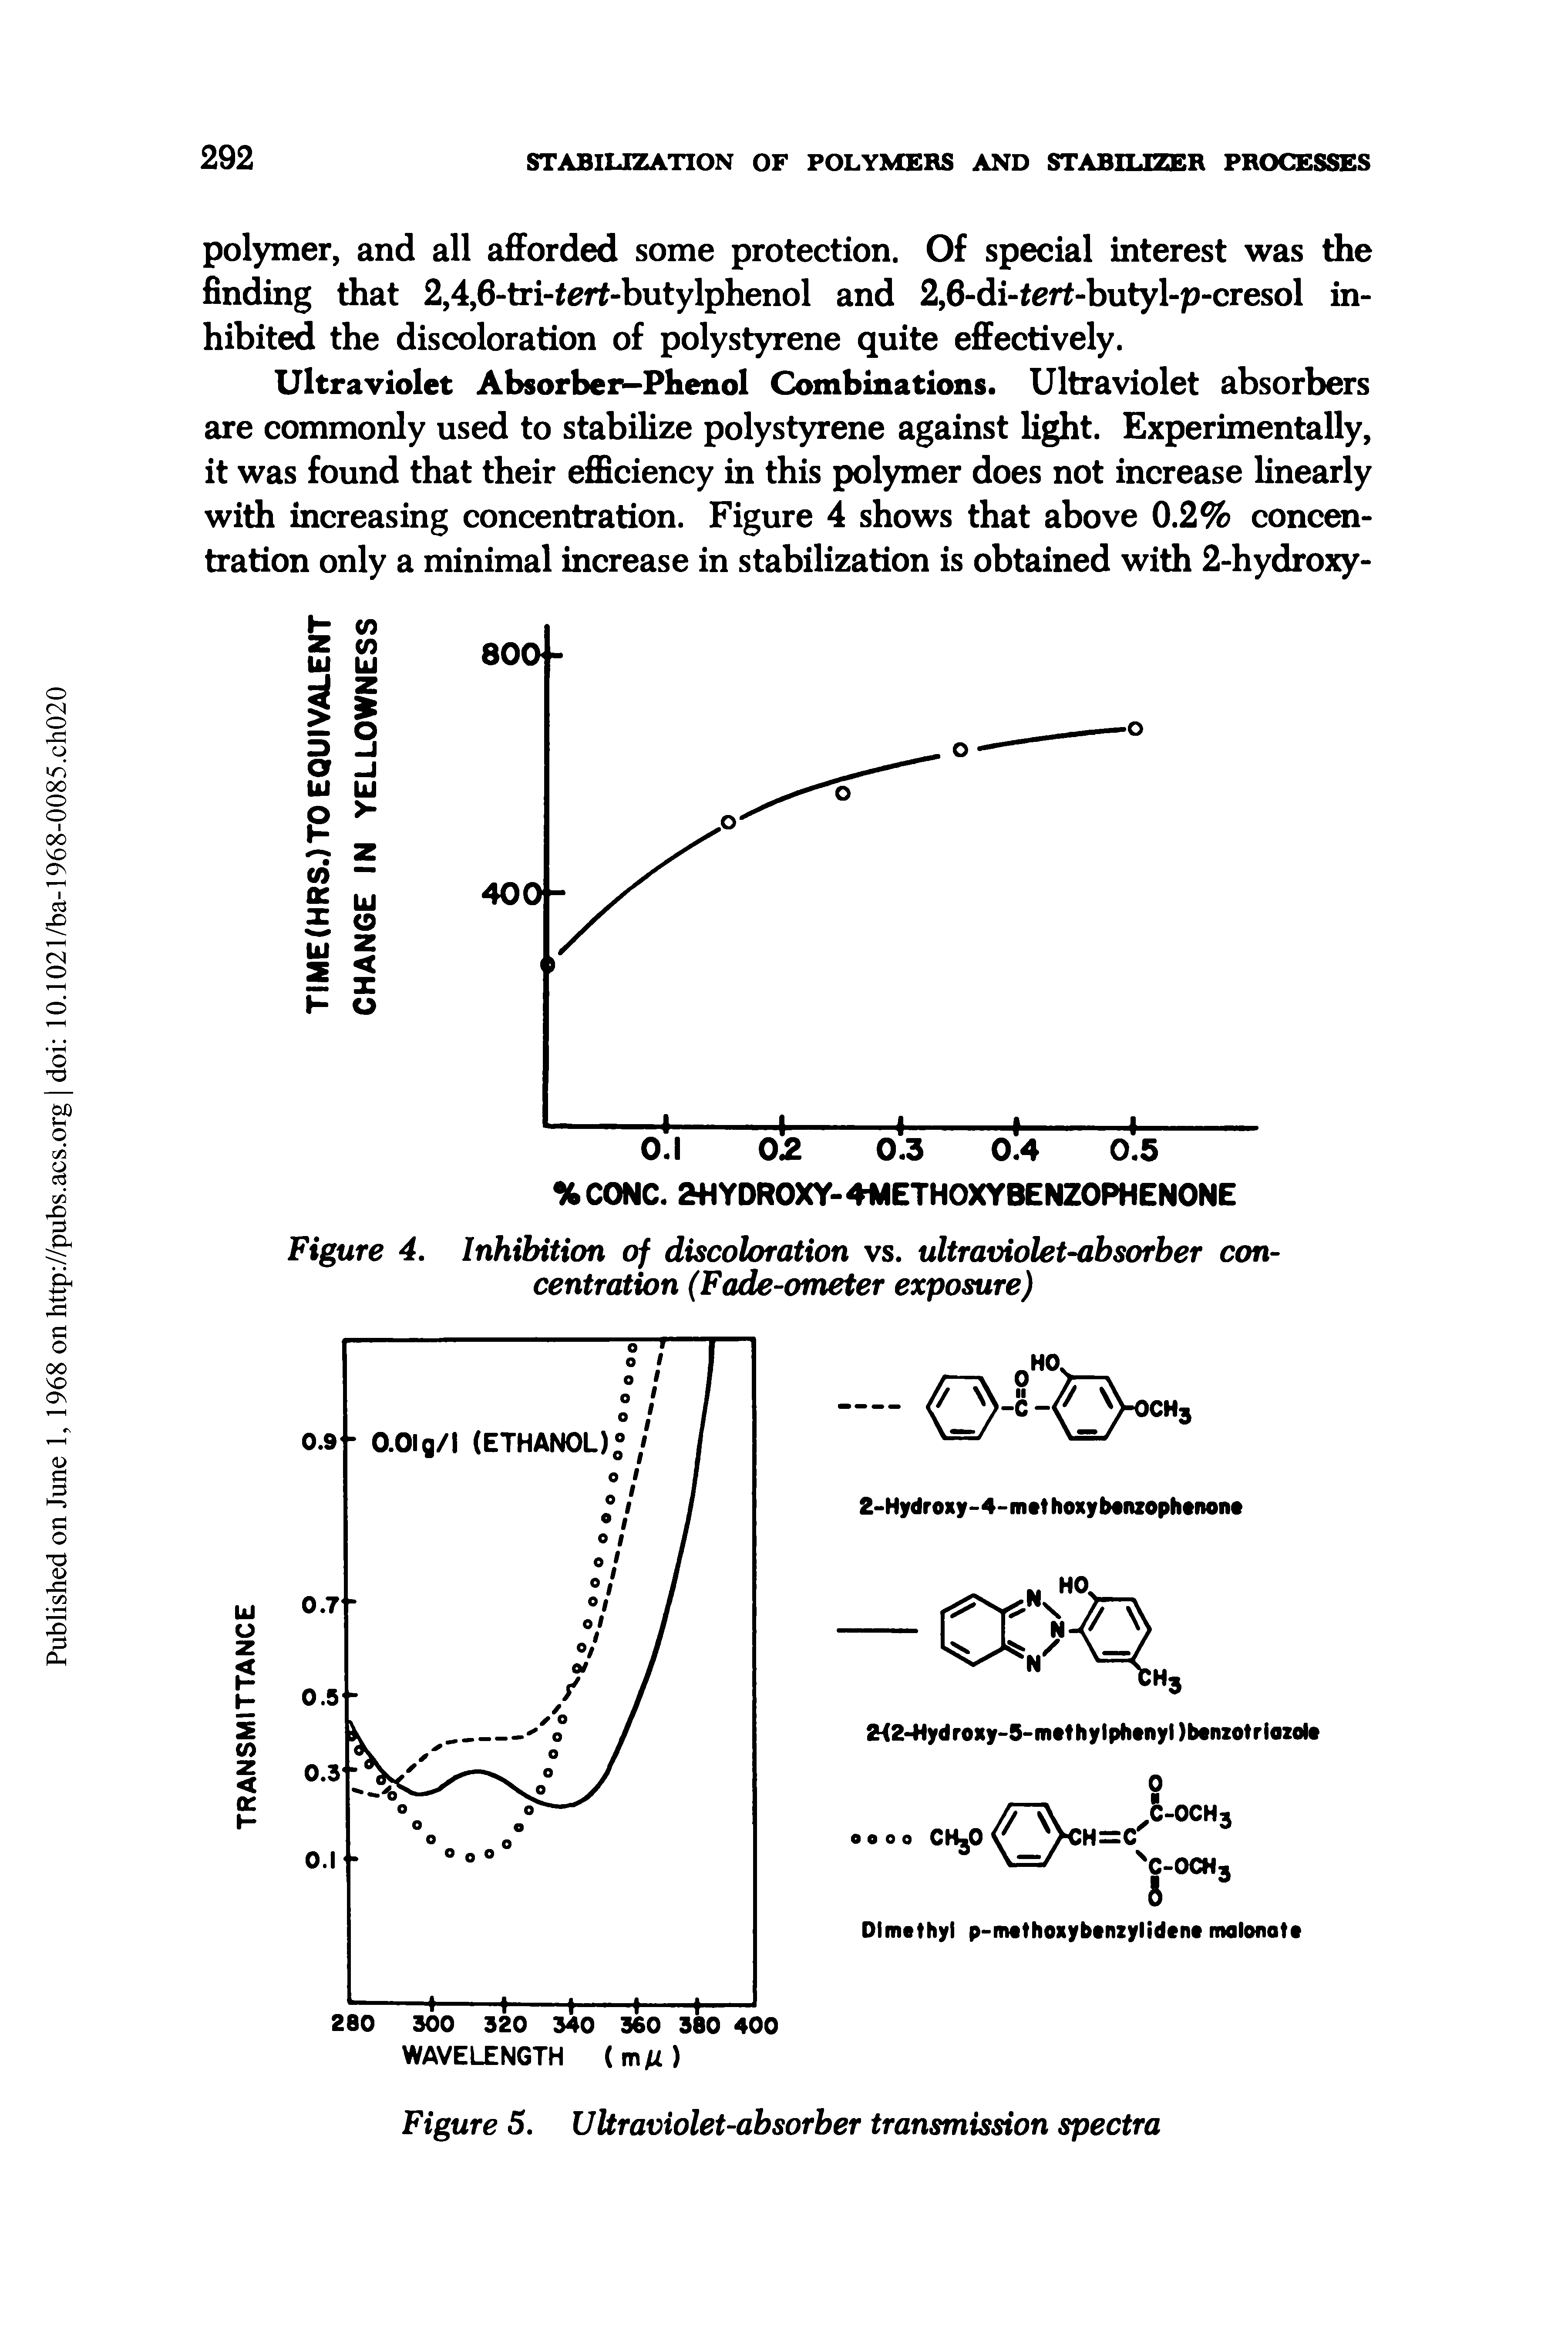 Figure 4. Inhibition of discoloration vs. ultraviolet-absorber concentration (Fade-ometer exposure)...